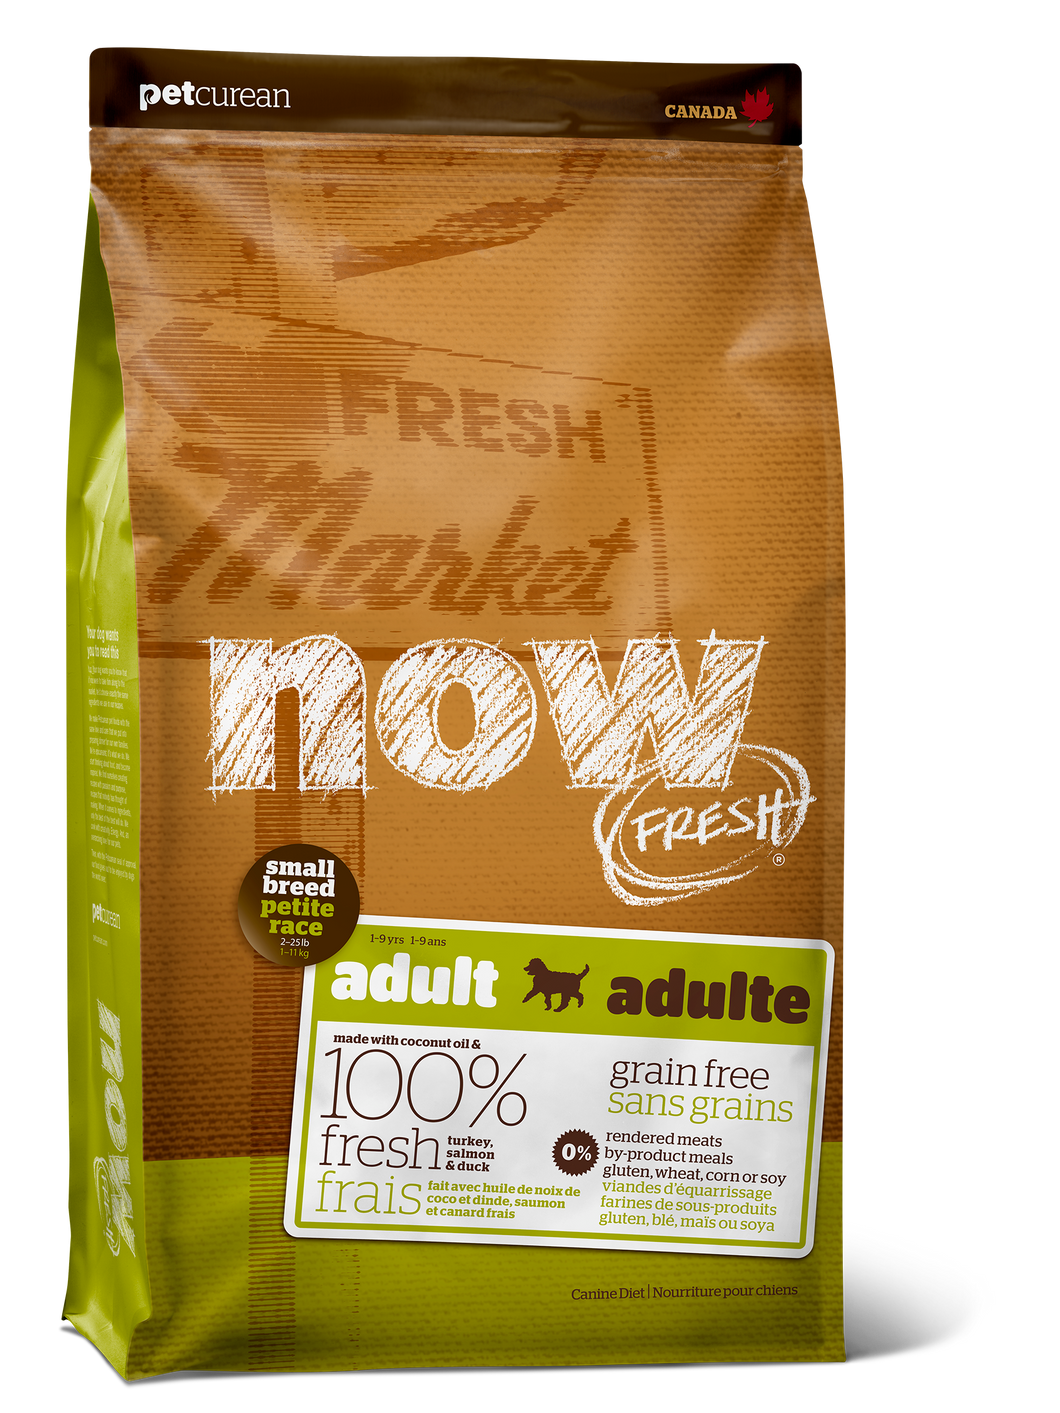 NOW FRESH ADULT SMALL BREED DOG 12LB